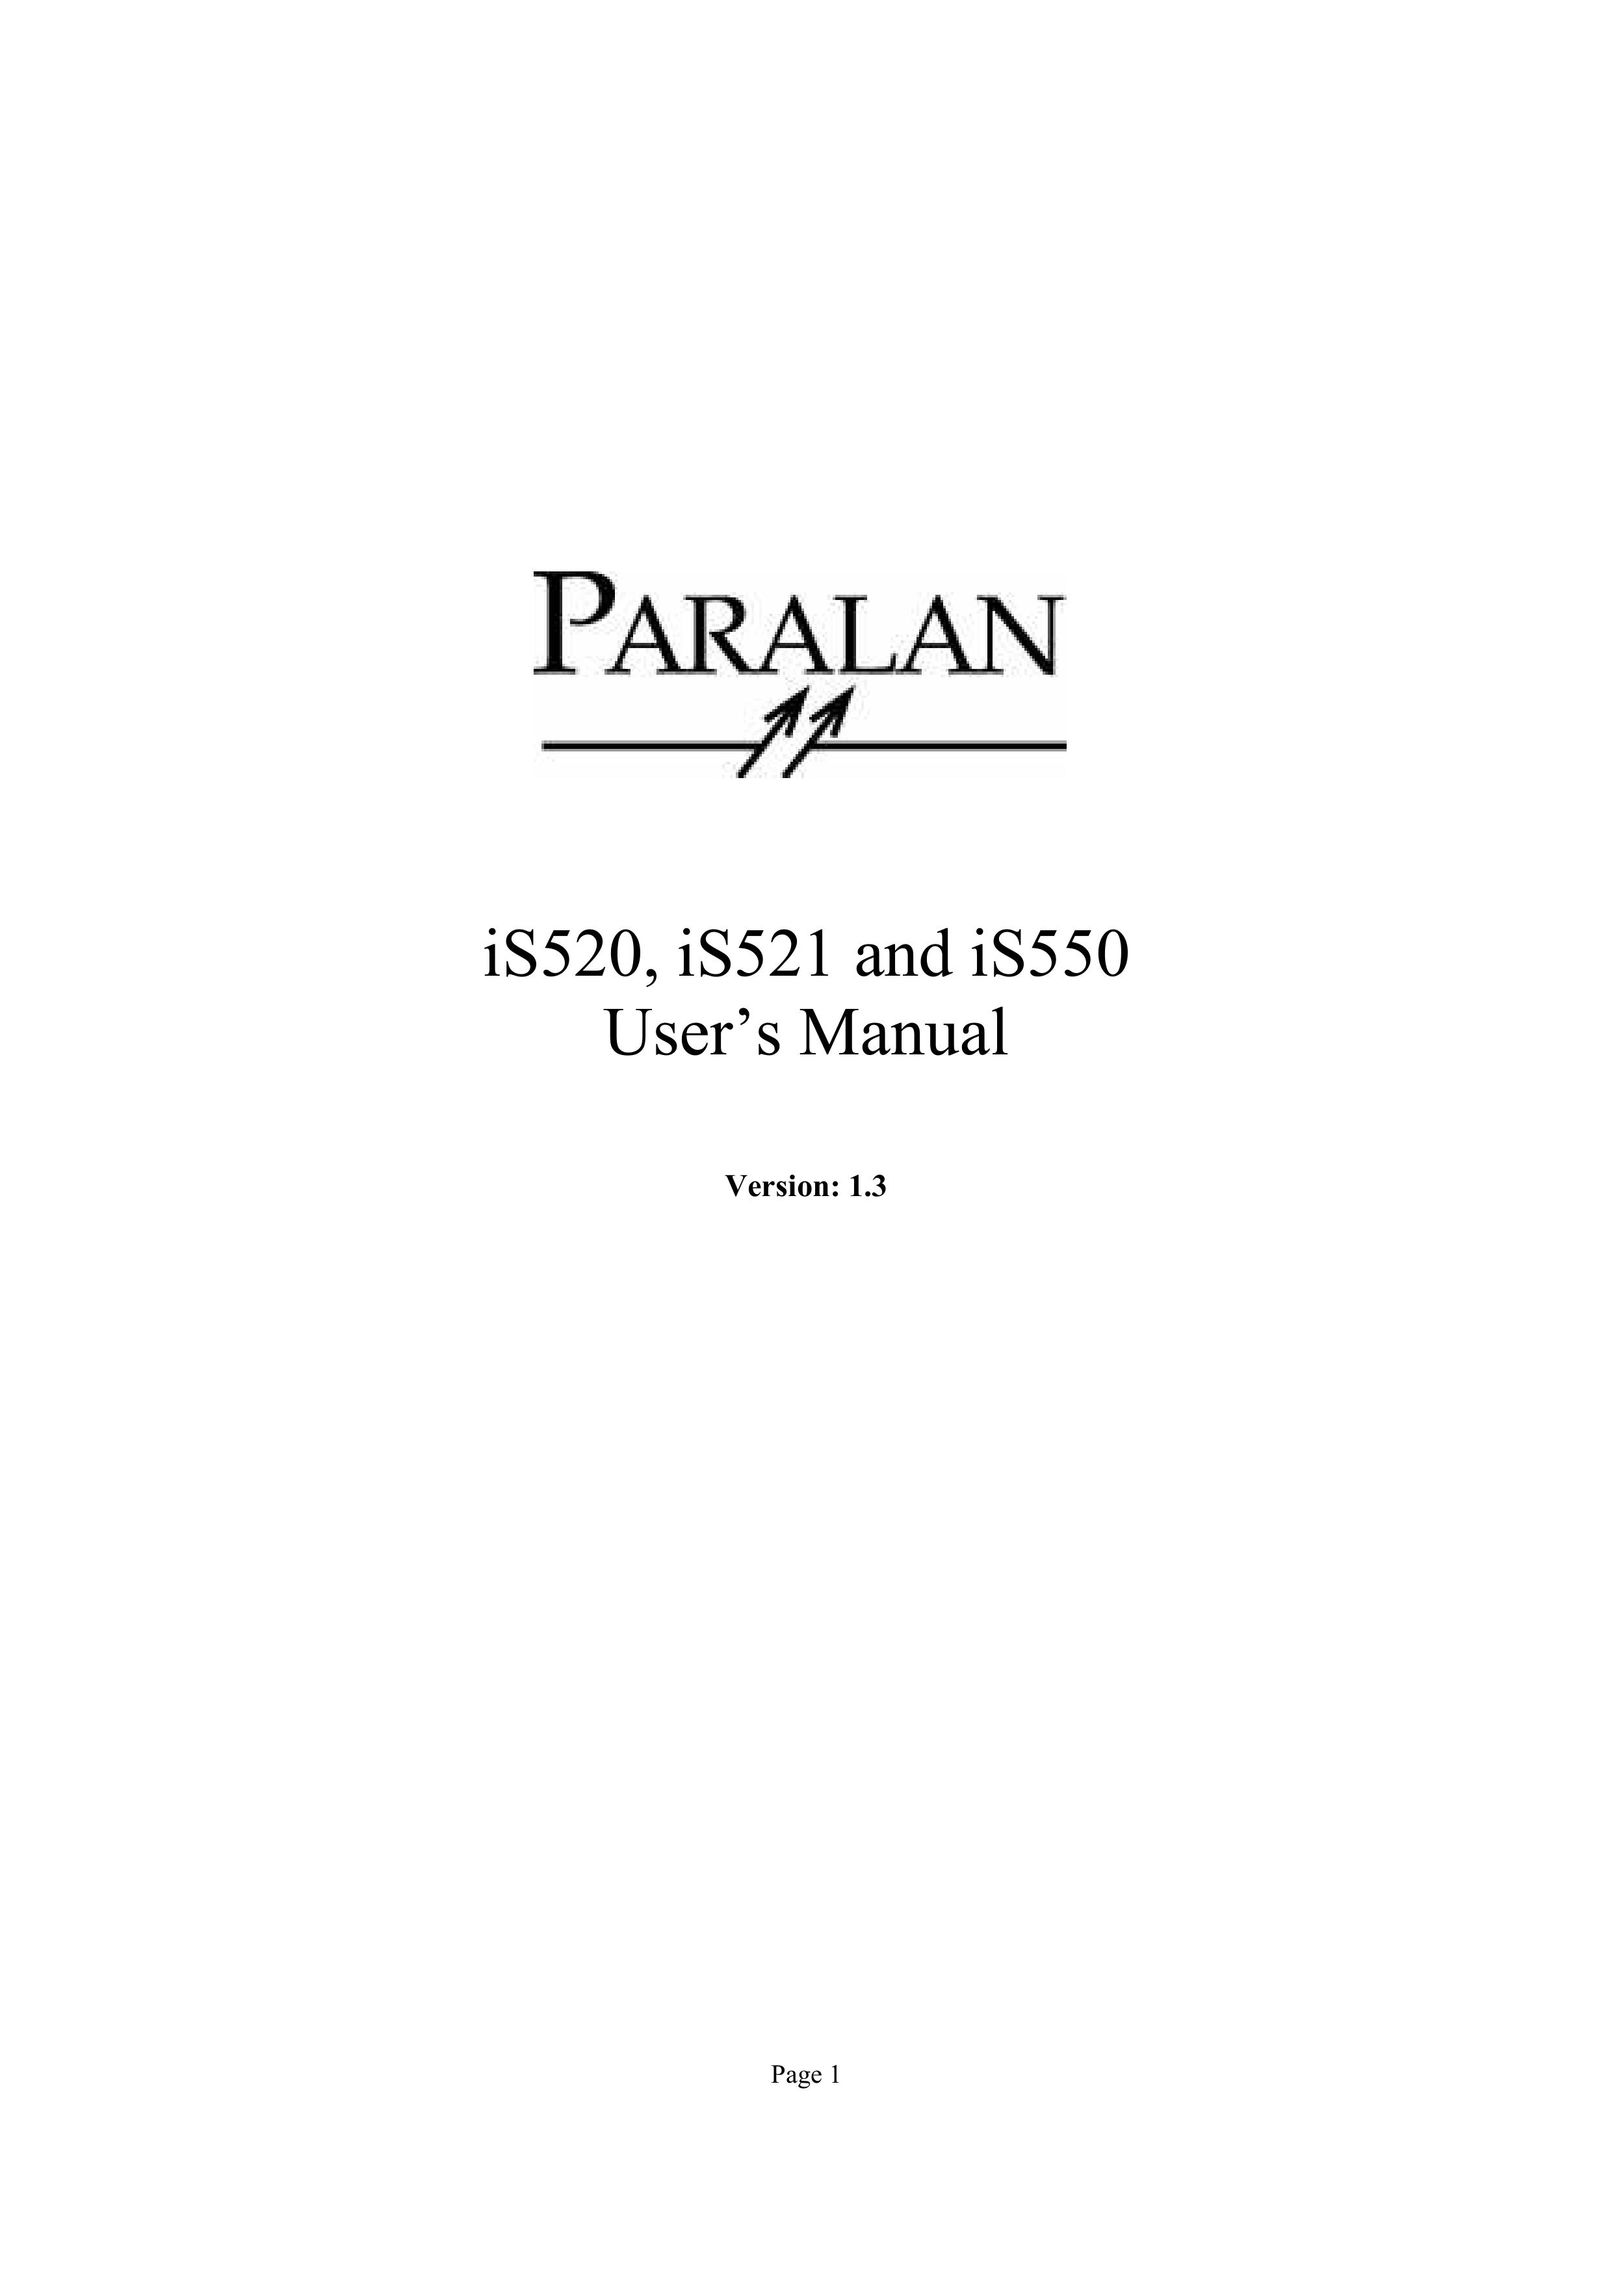 Paralan iS520 Switch User Manual